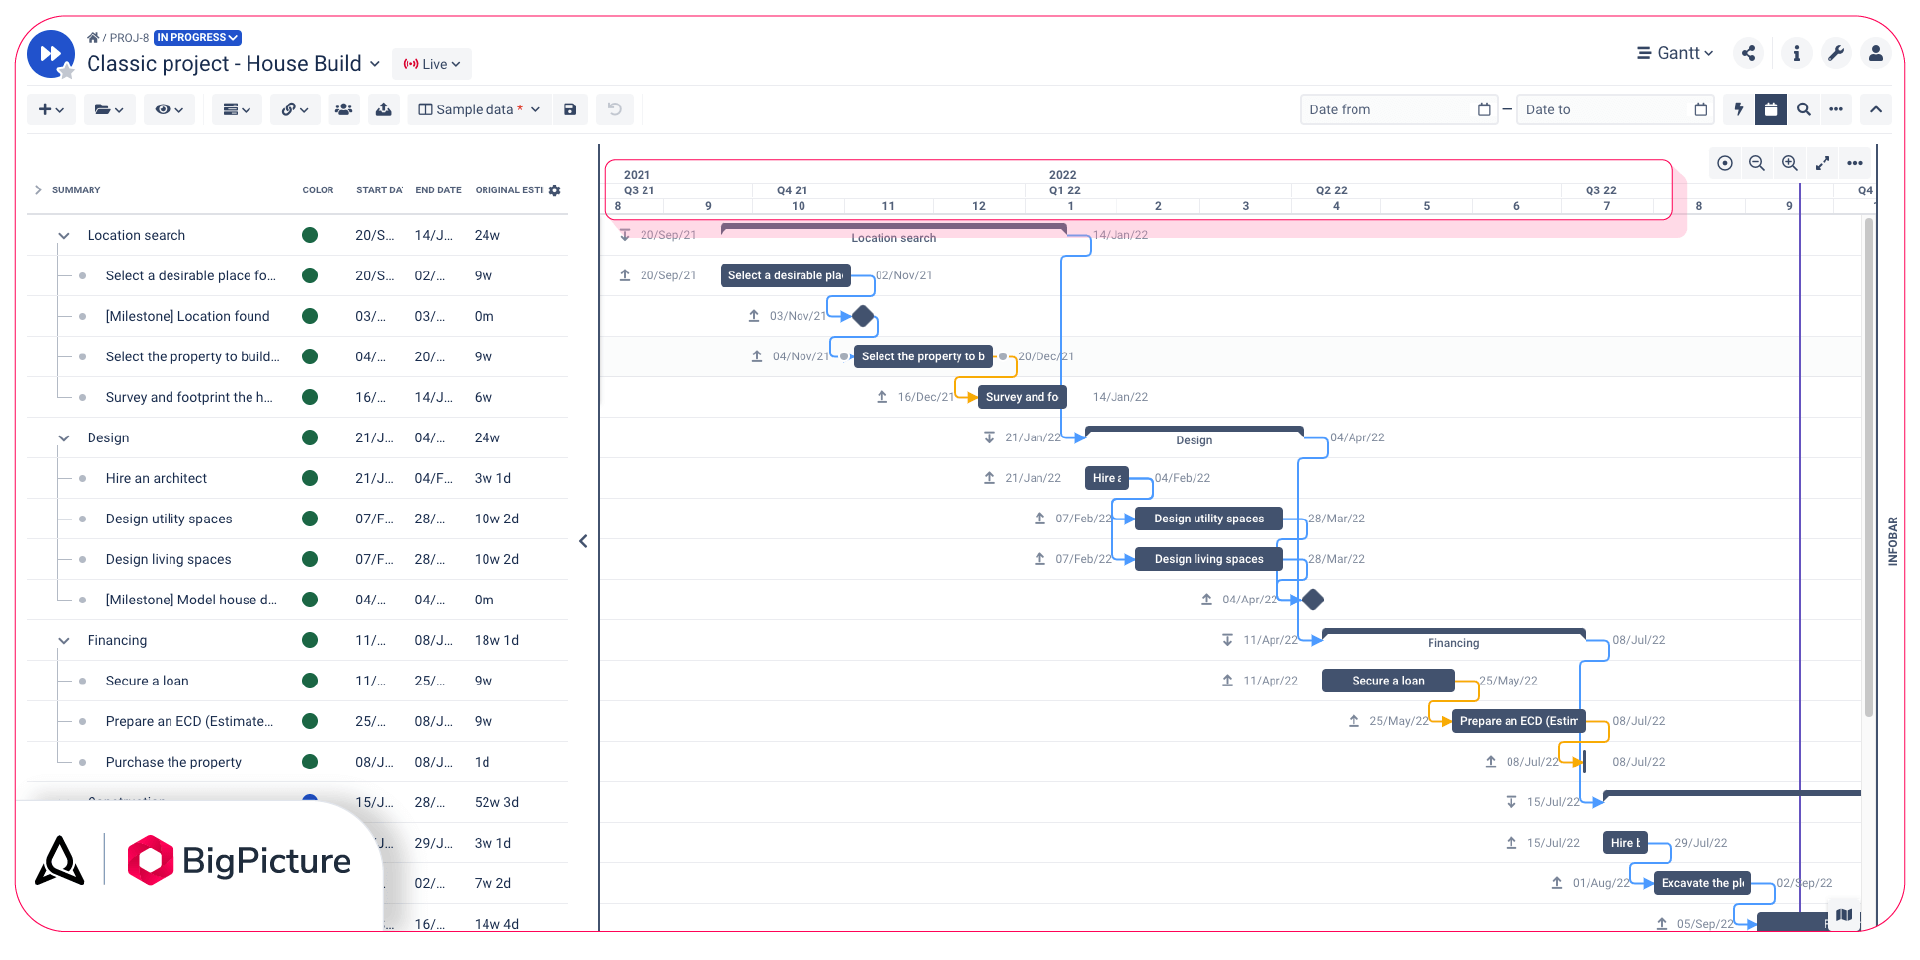 The Gantt chart with the timeline of the project highlighted in red